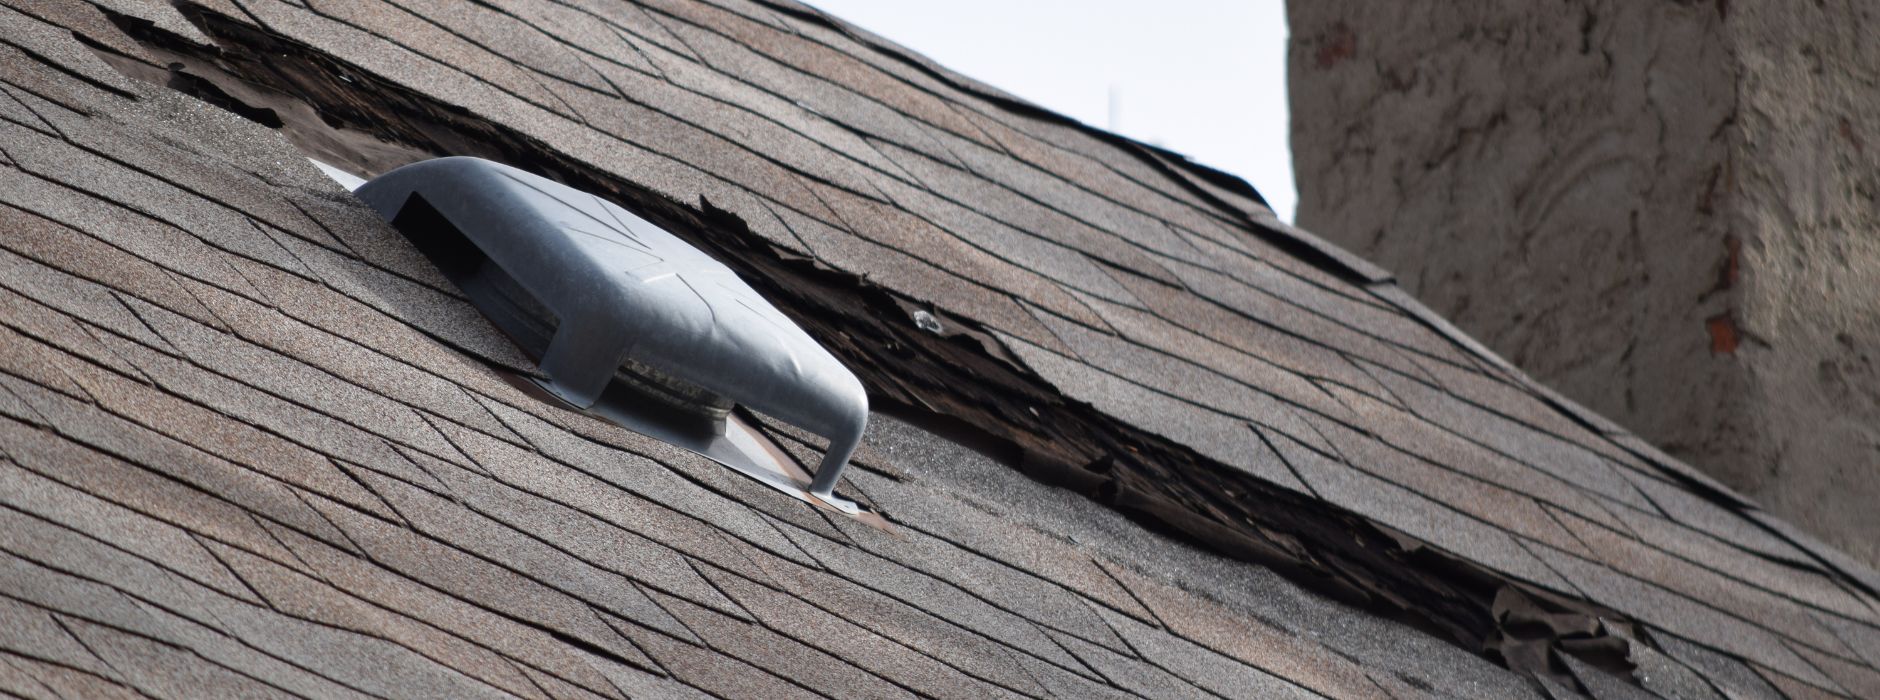 Warning Signs You Need a New Roof 3 Things to Look For